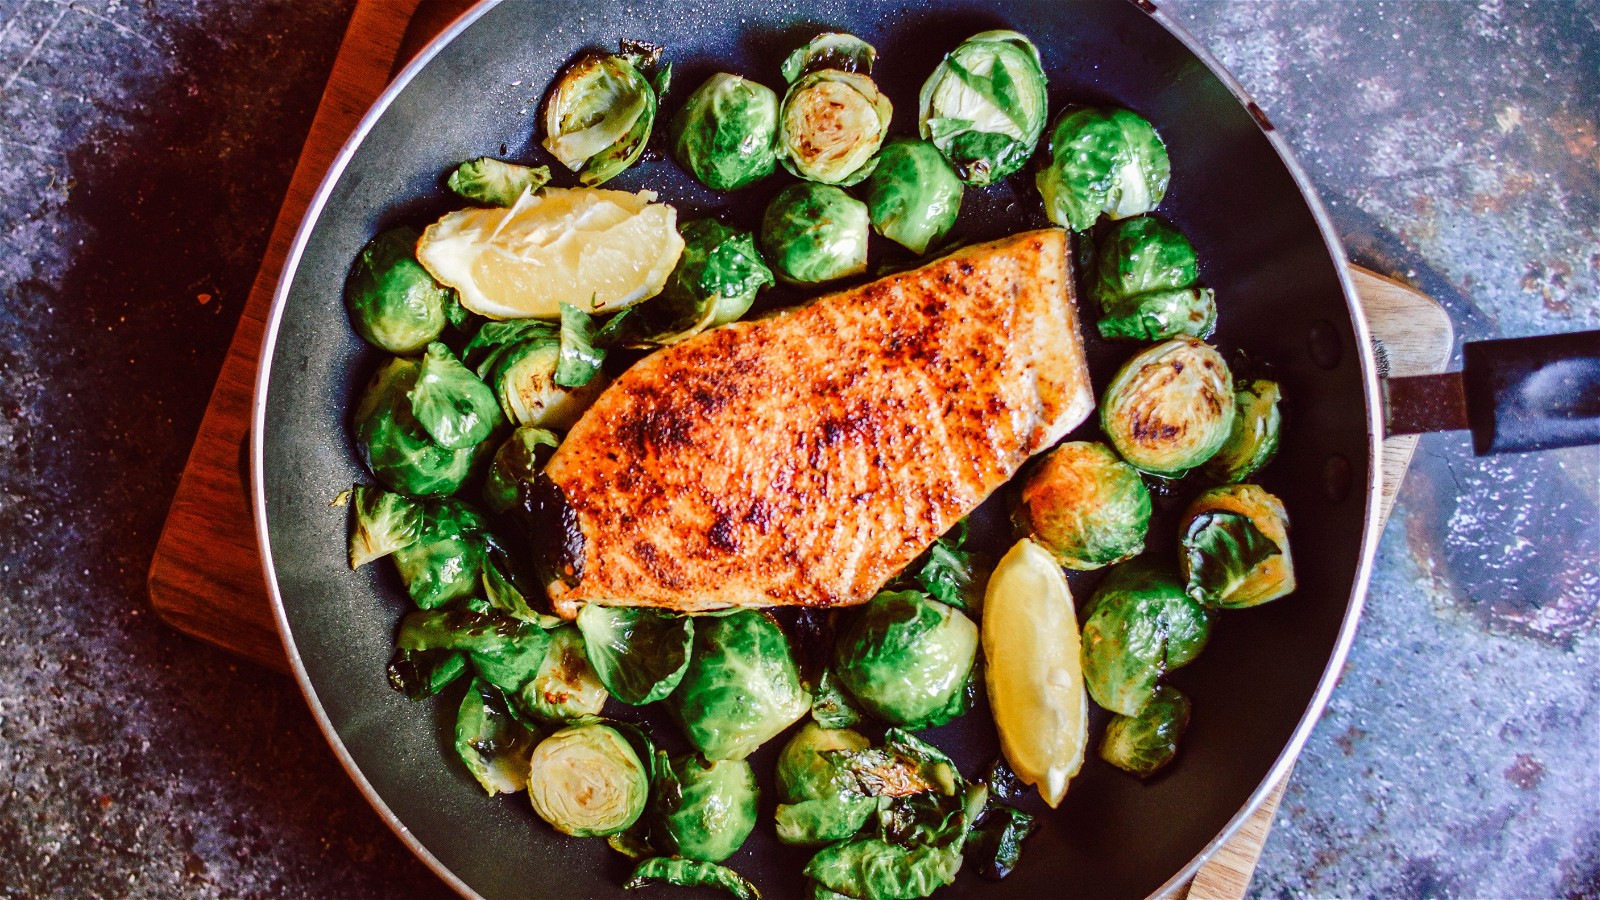 Image of BLACKENED SWORDFISH WITH SEARED BRUSSELS SPROUTS